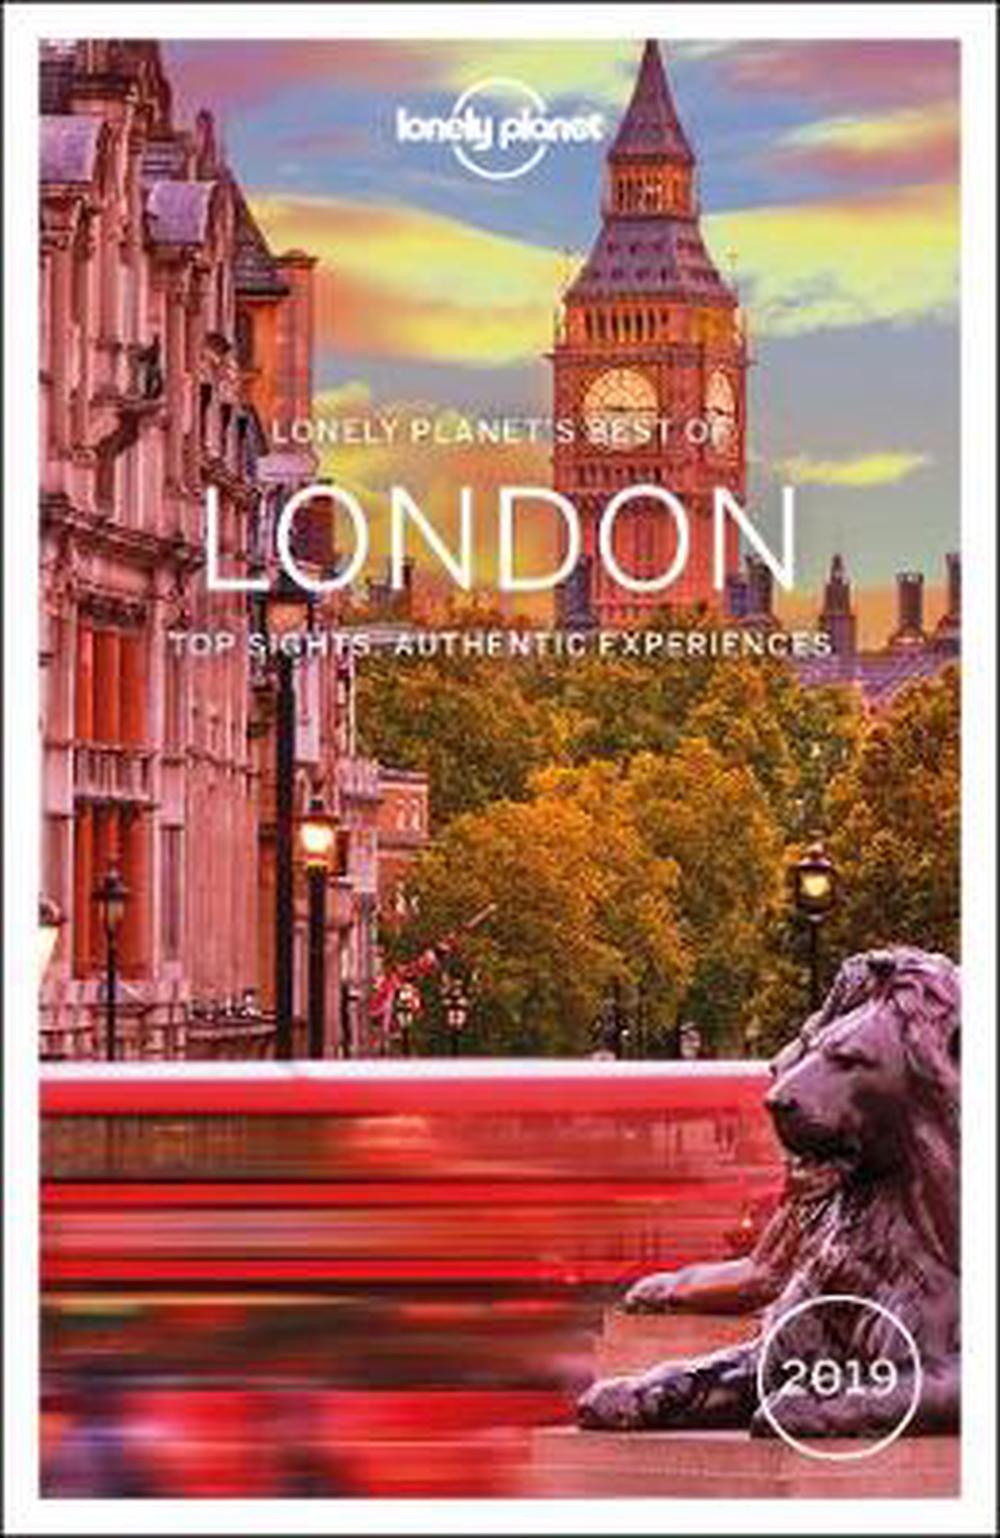 Best　at　Paperback,　London　Planet,　2019　of　online　by　Planet　Lonely　Buy　The　Lonely　9781786571618　Nile